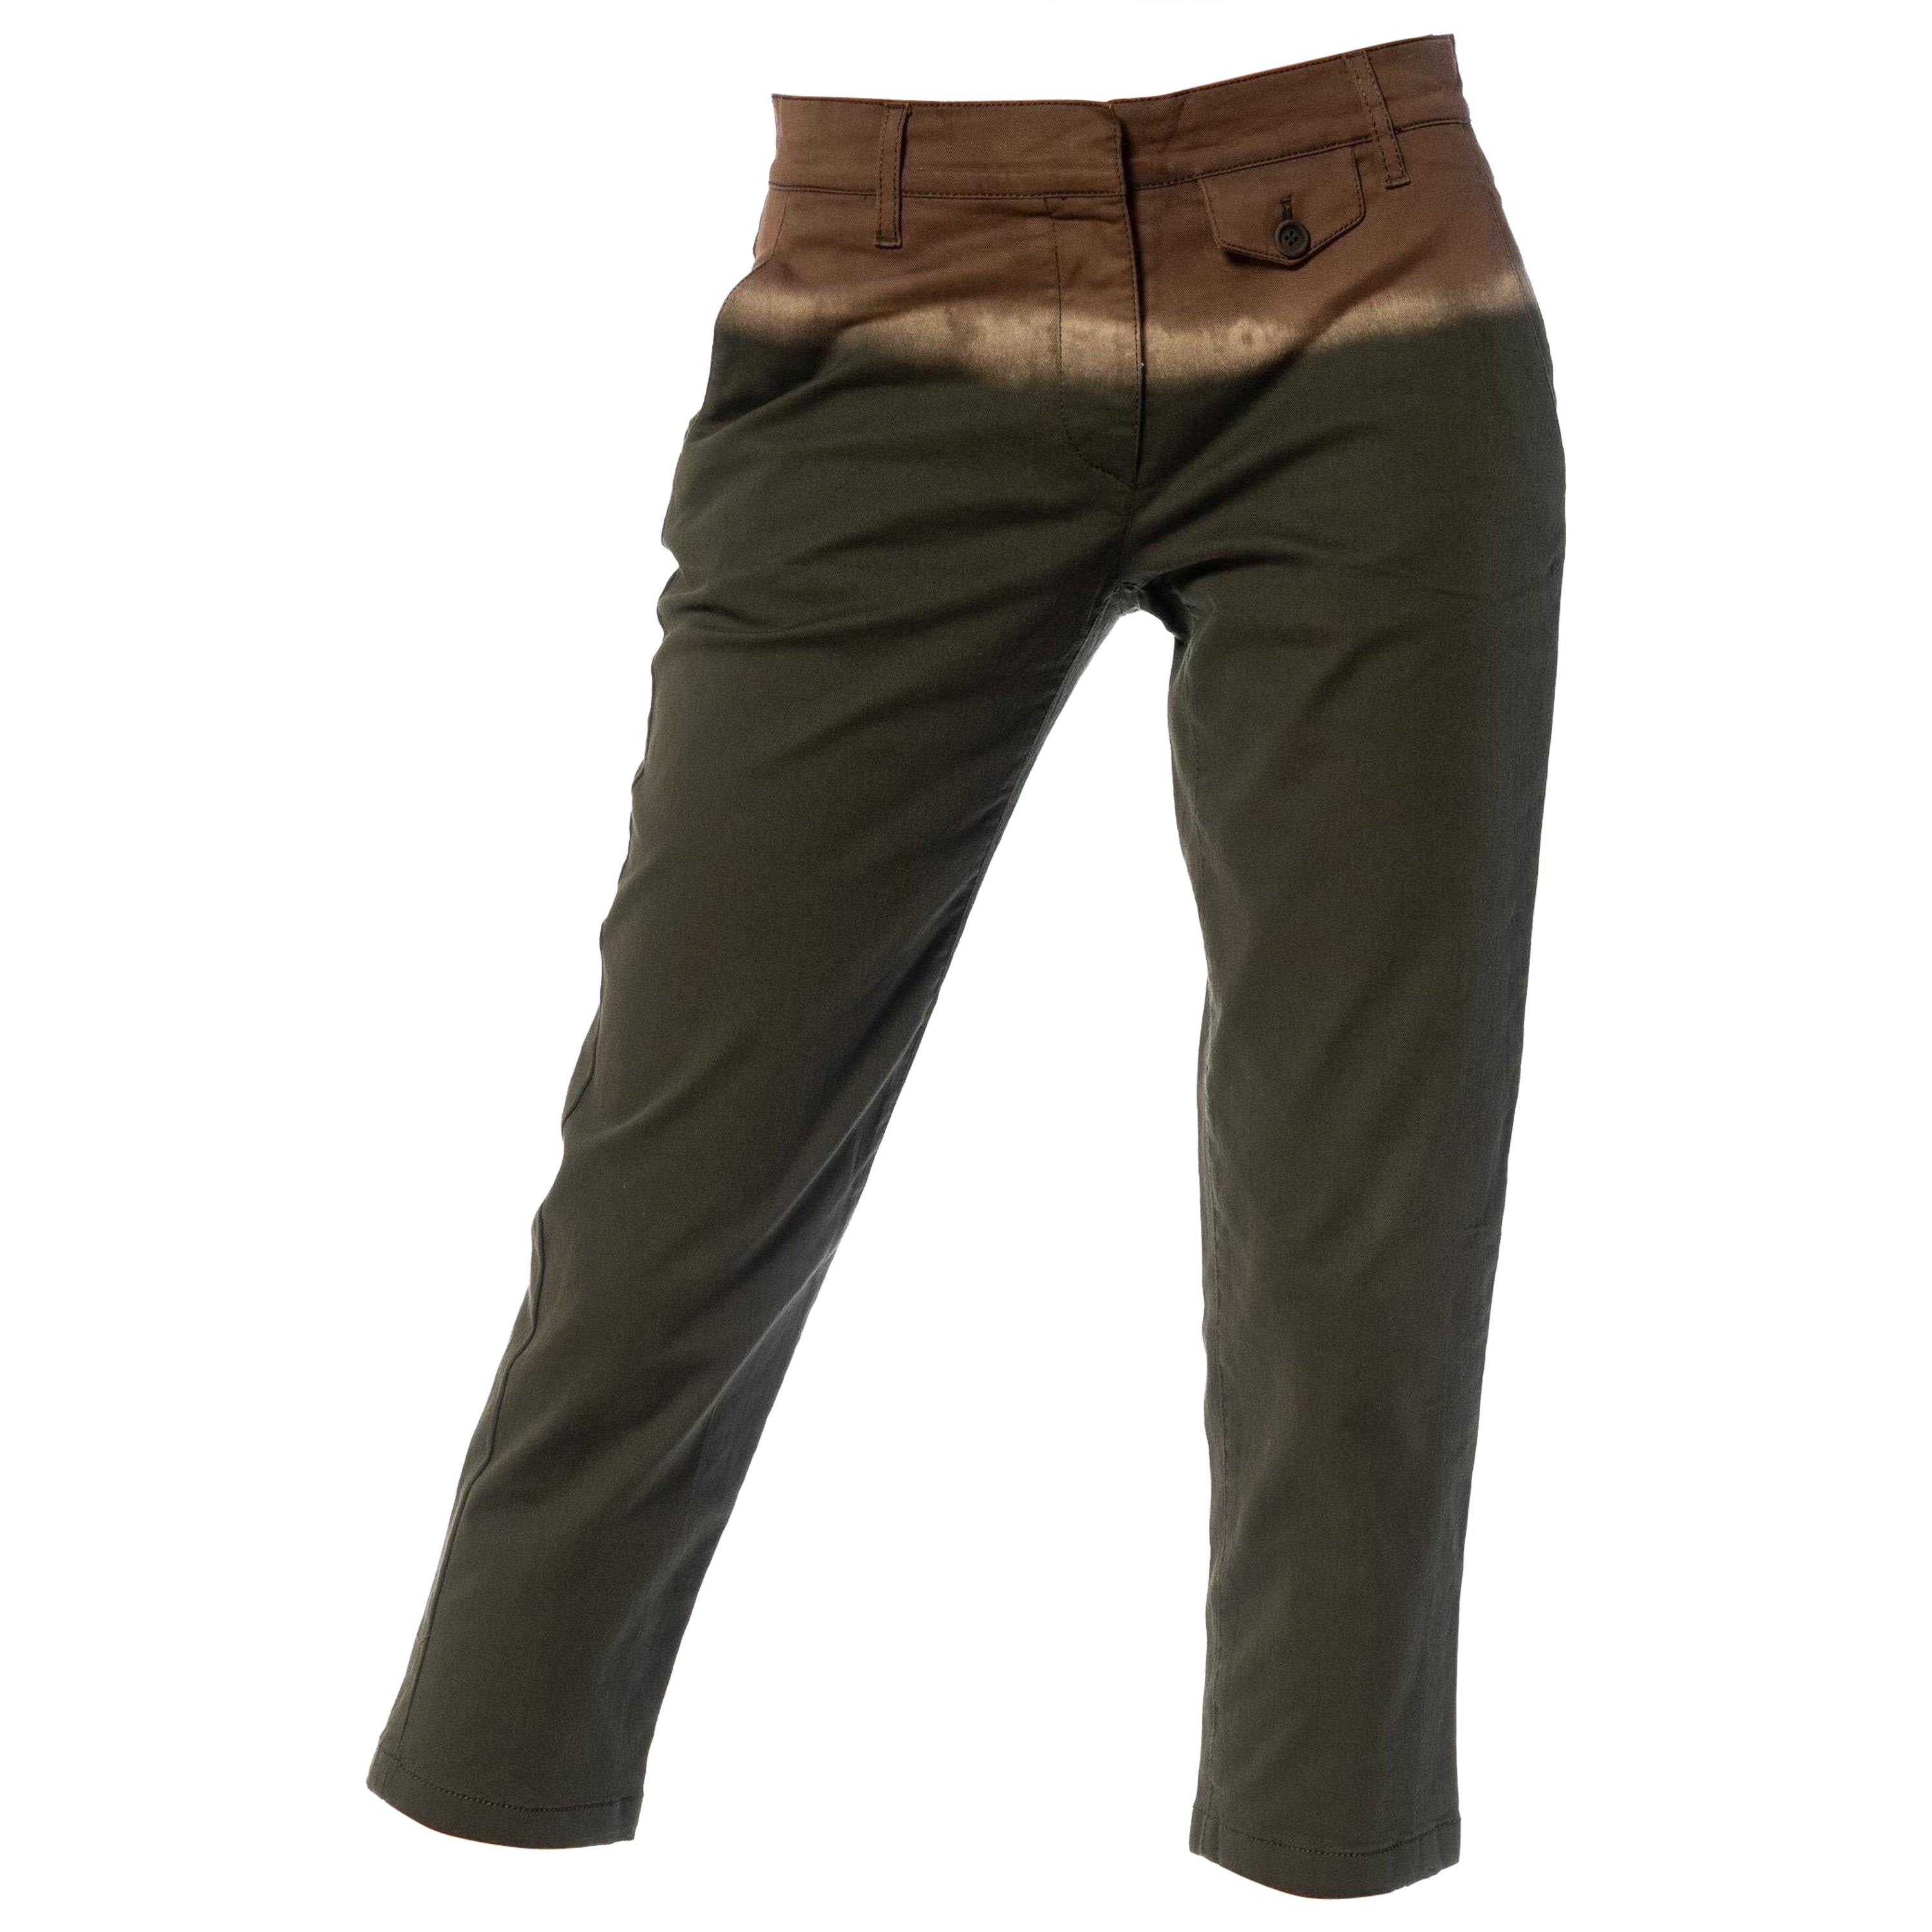 2000S PRADA Brown & Olive Green Cotton Pants For Sale